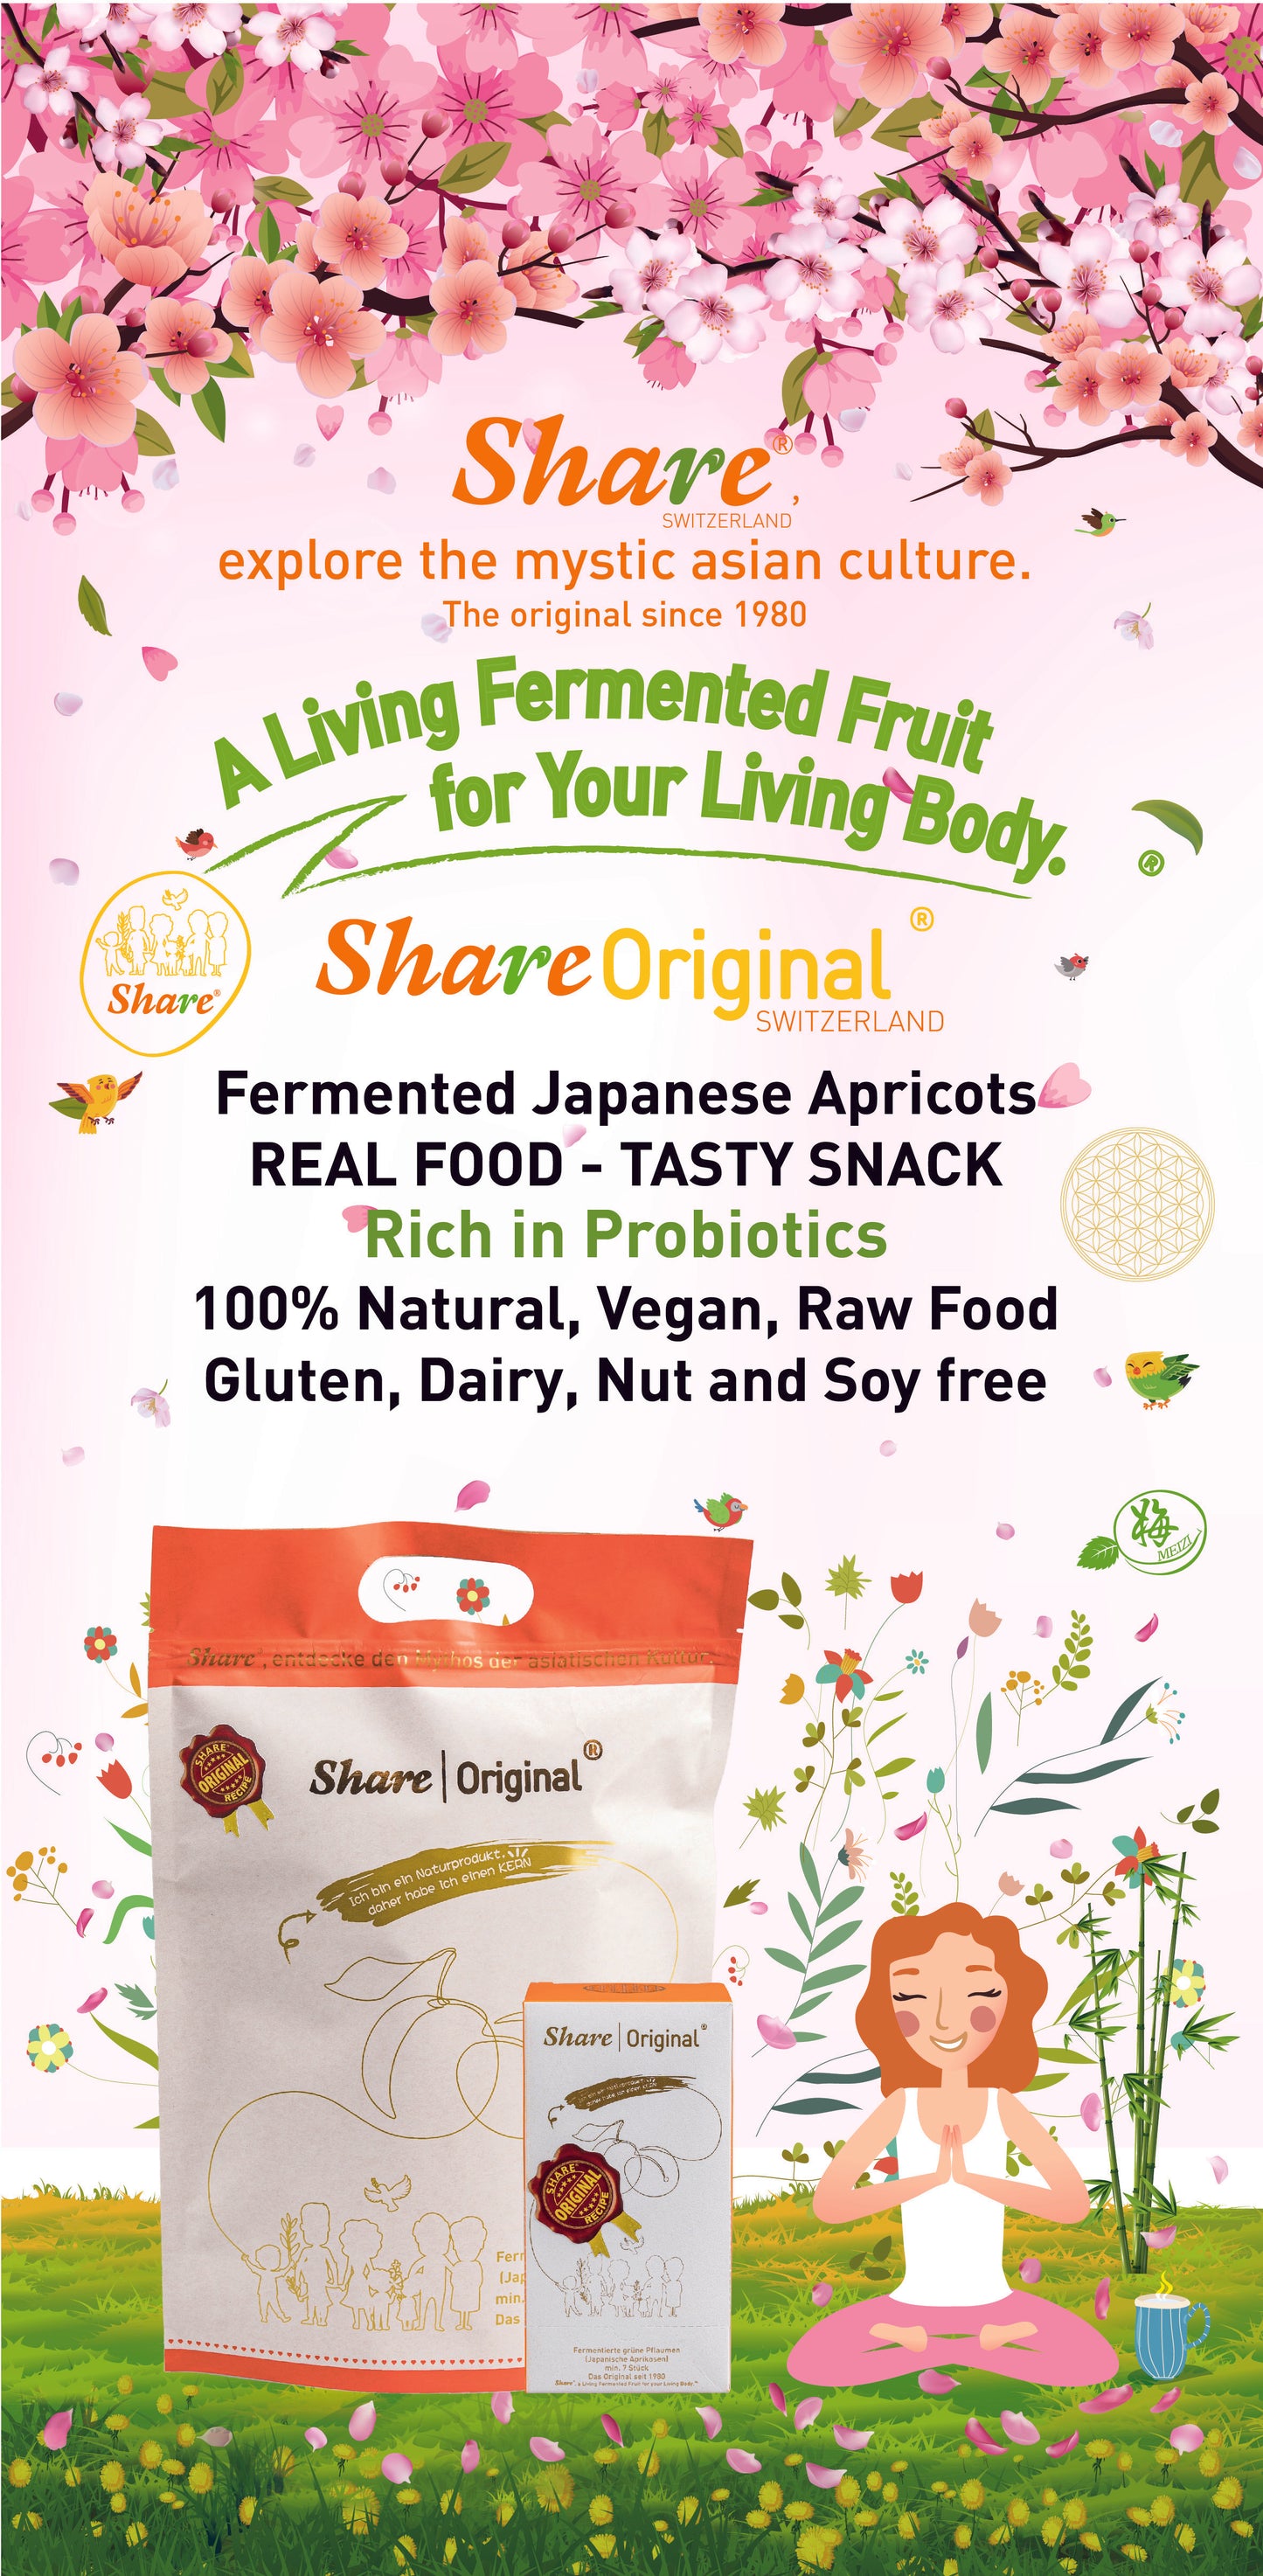 Share Original® (500g Bag, 30~33 pieces): fermented Japanese apricot, effective natural alternative to lab-made laxatives and probiotics, 30-month natural fermented fruit, vegan & non-GMO, individually wrapped packet (made in Switzerland, free shipping)